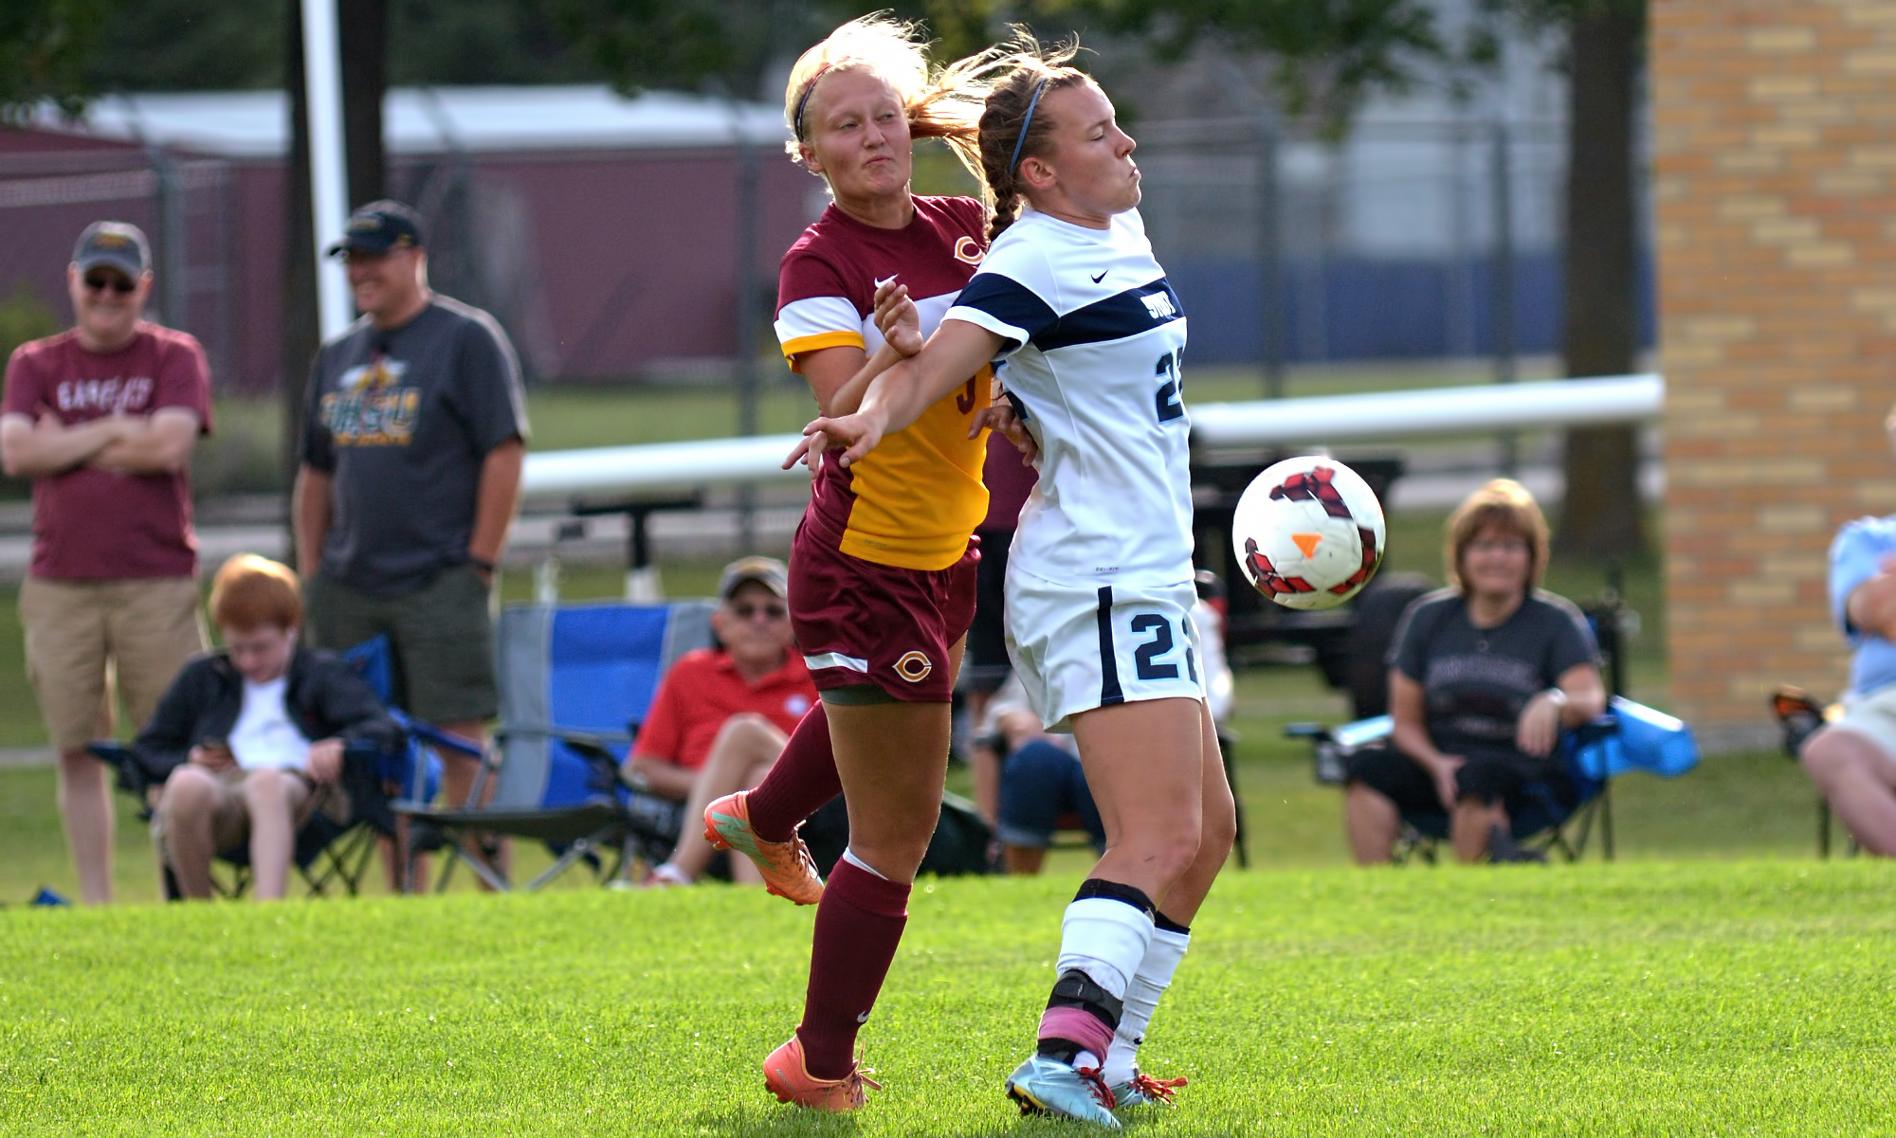 Sophomore defender Erin Eidsness defends against a Wis.-Stout attacker during the Cobbers' 0-0 double OT tie in the season opener.